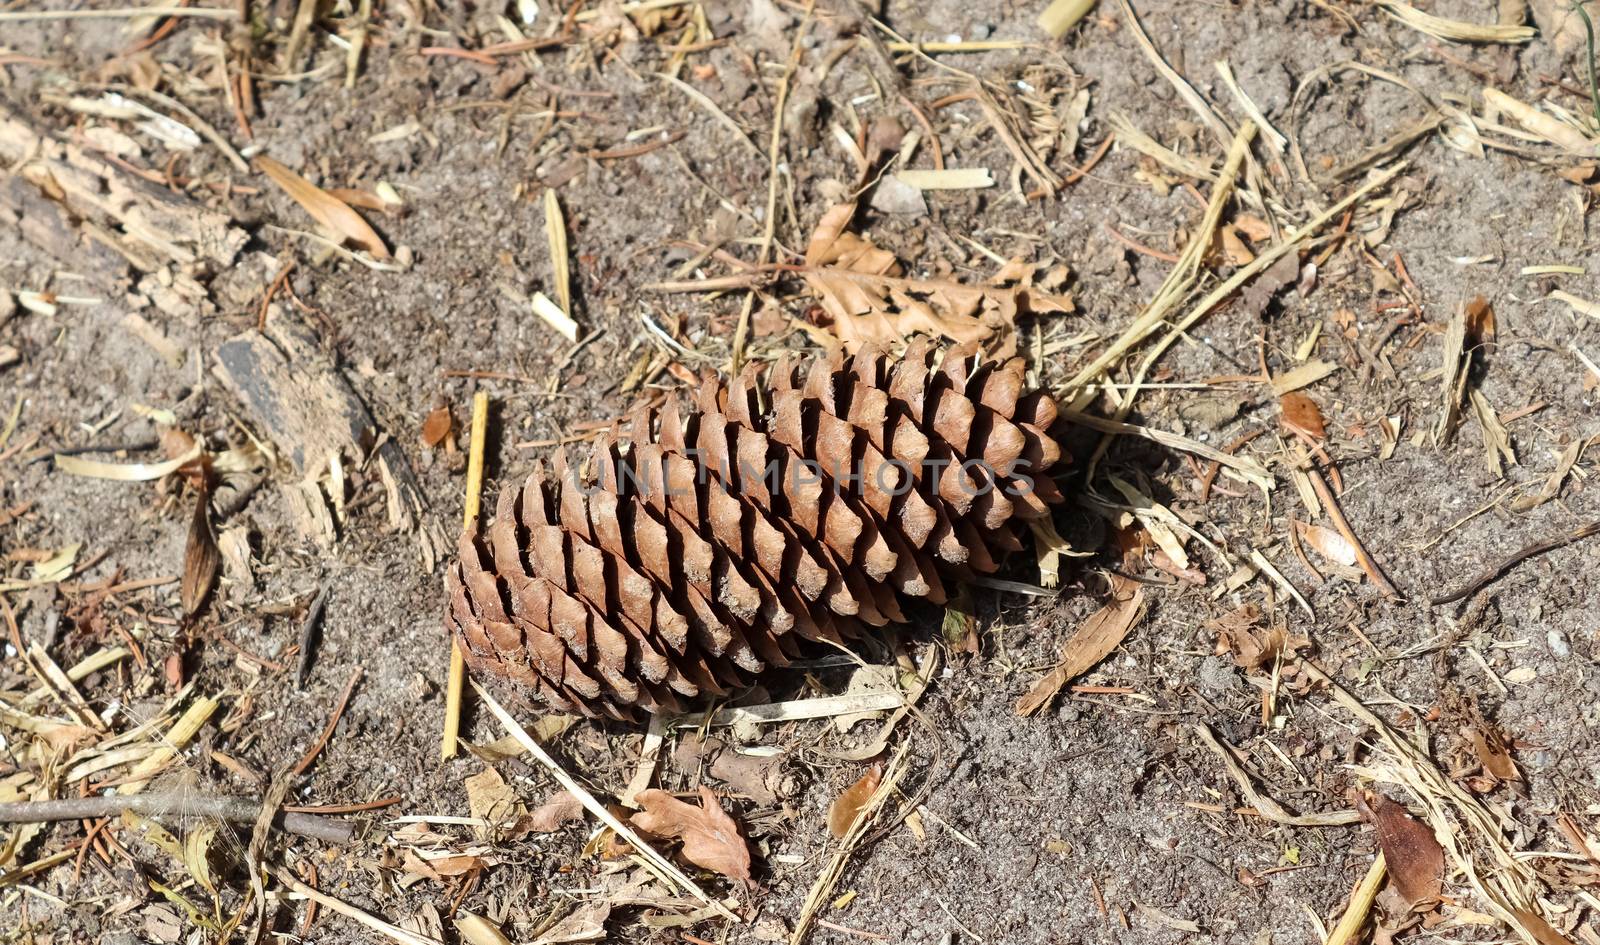 One long pine cone laying on the ground with brown needles on the forest ground